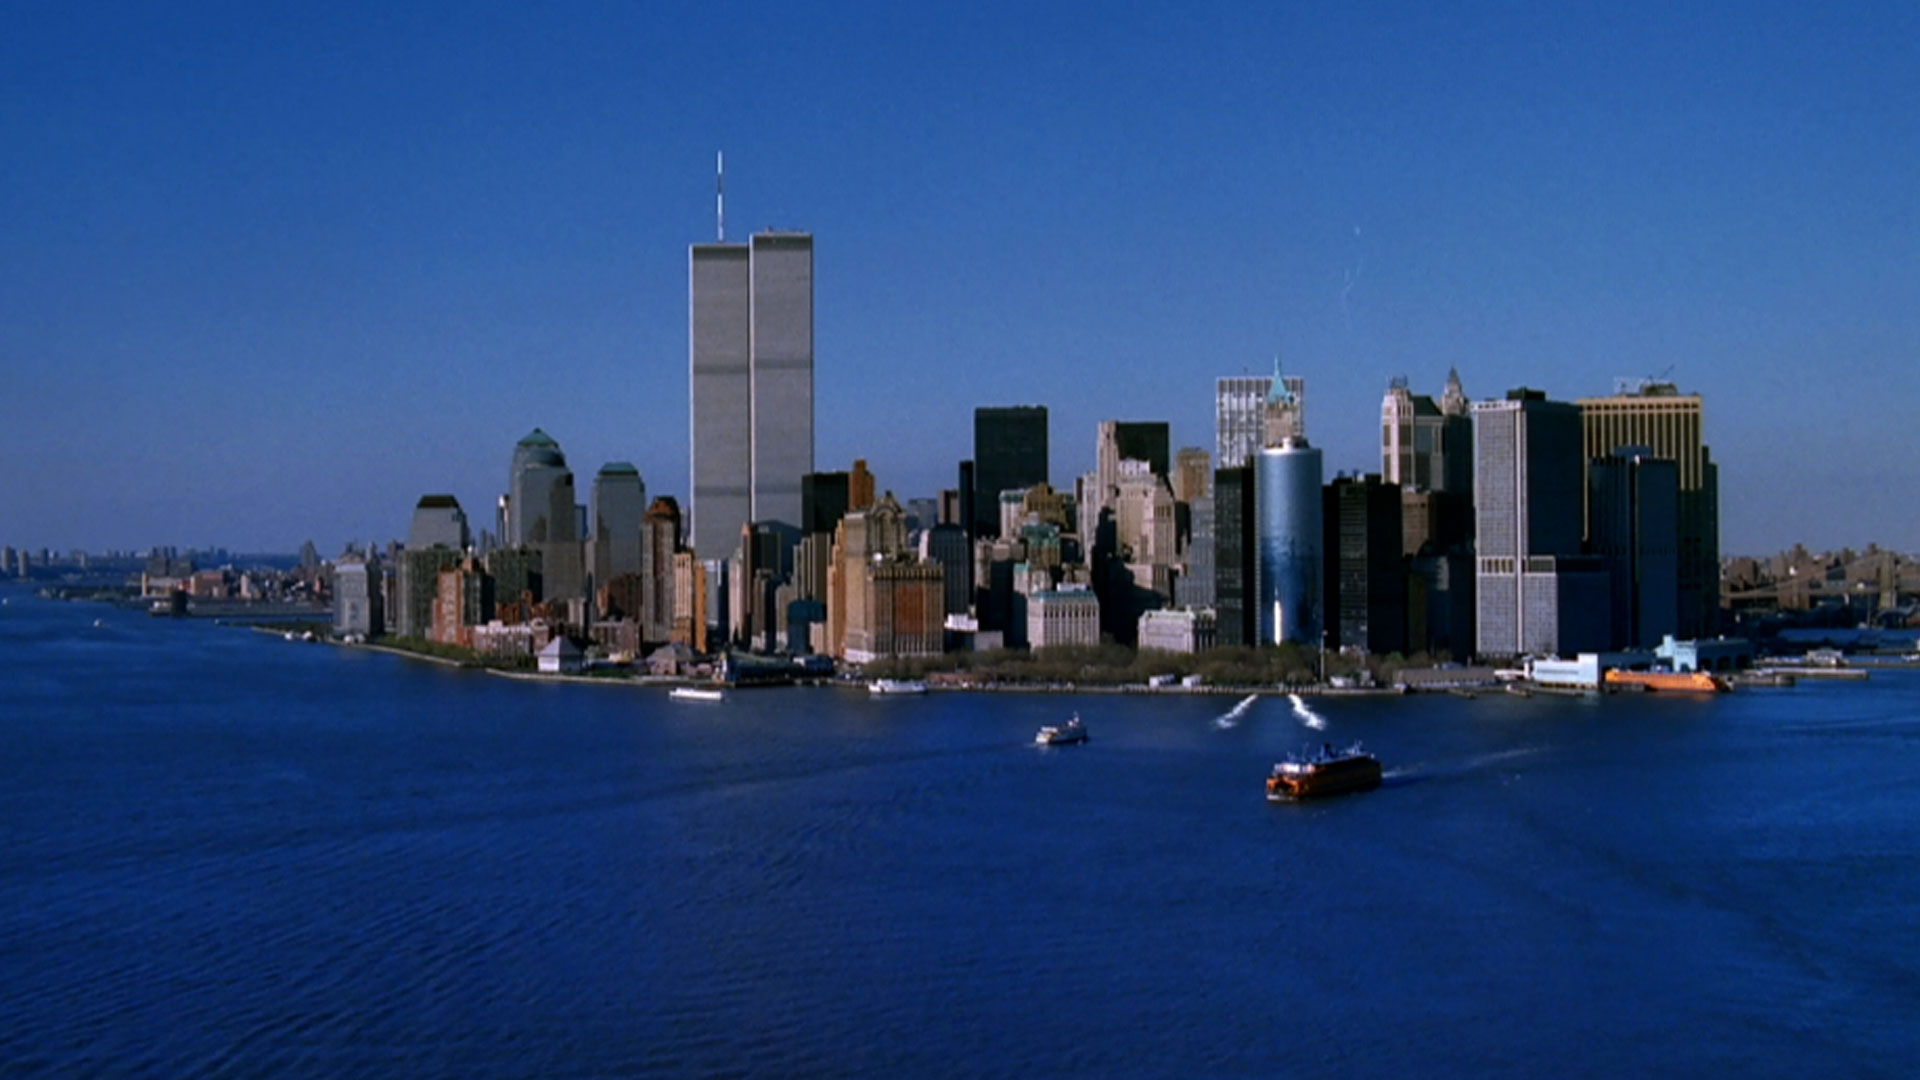 September 11th: Where Were You?